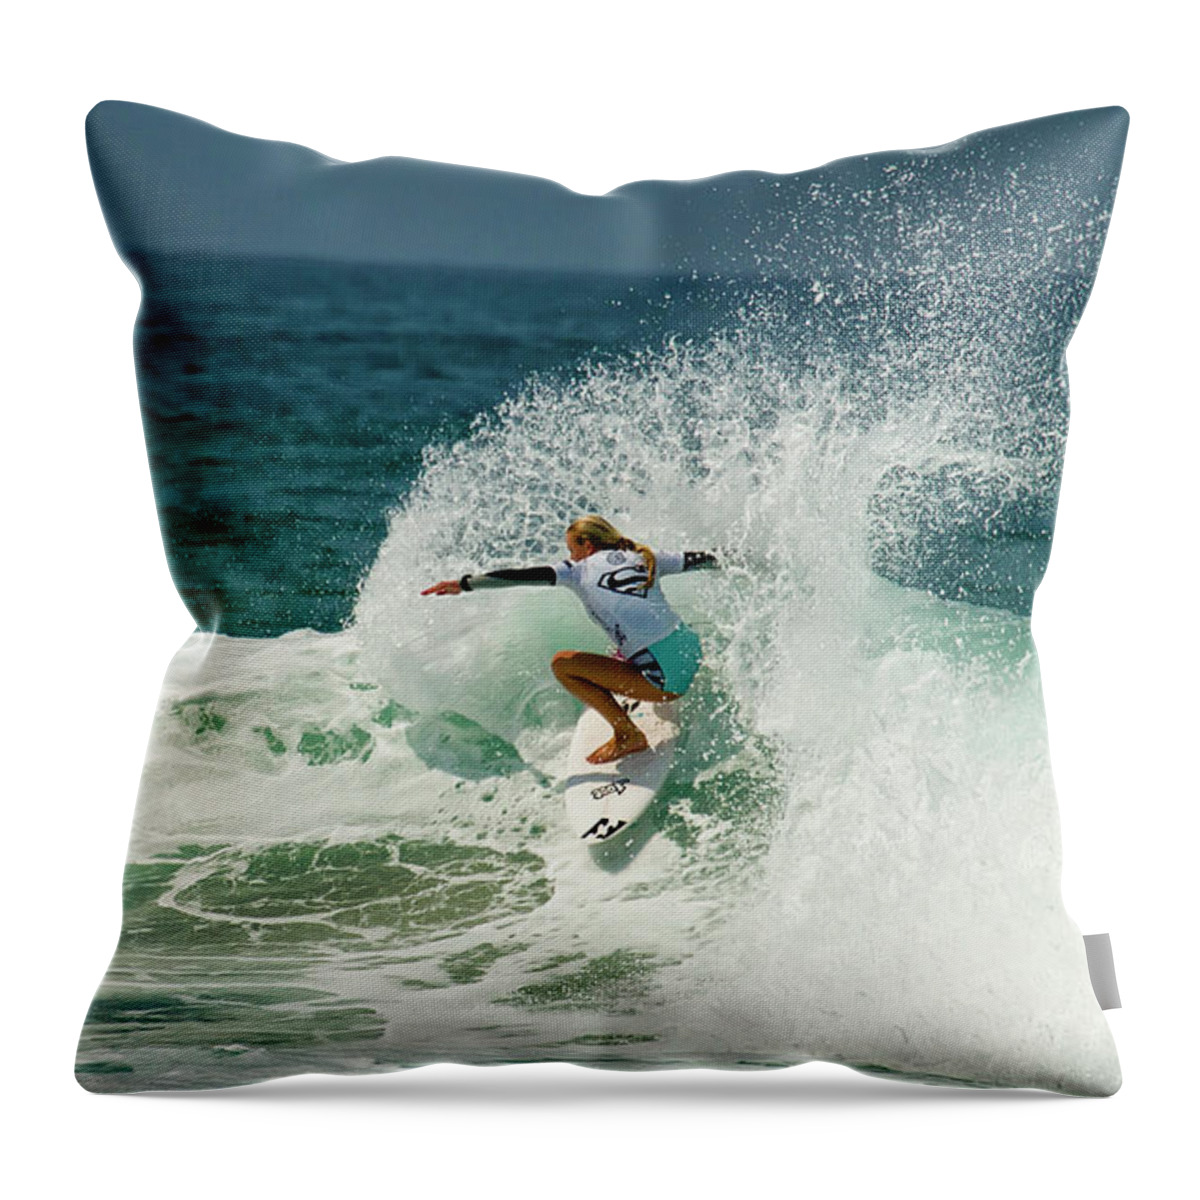 Supergirl Pro 2016 Throw Pillow featuring the photograph Macy Callaghan #2 by Waterdancer